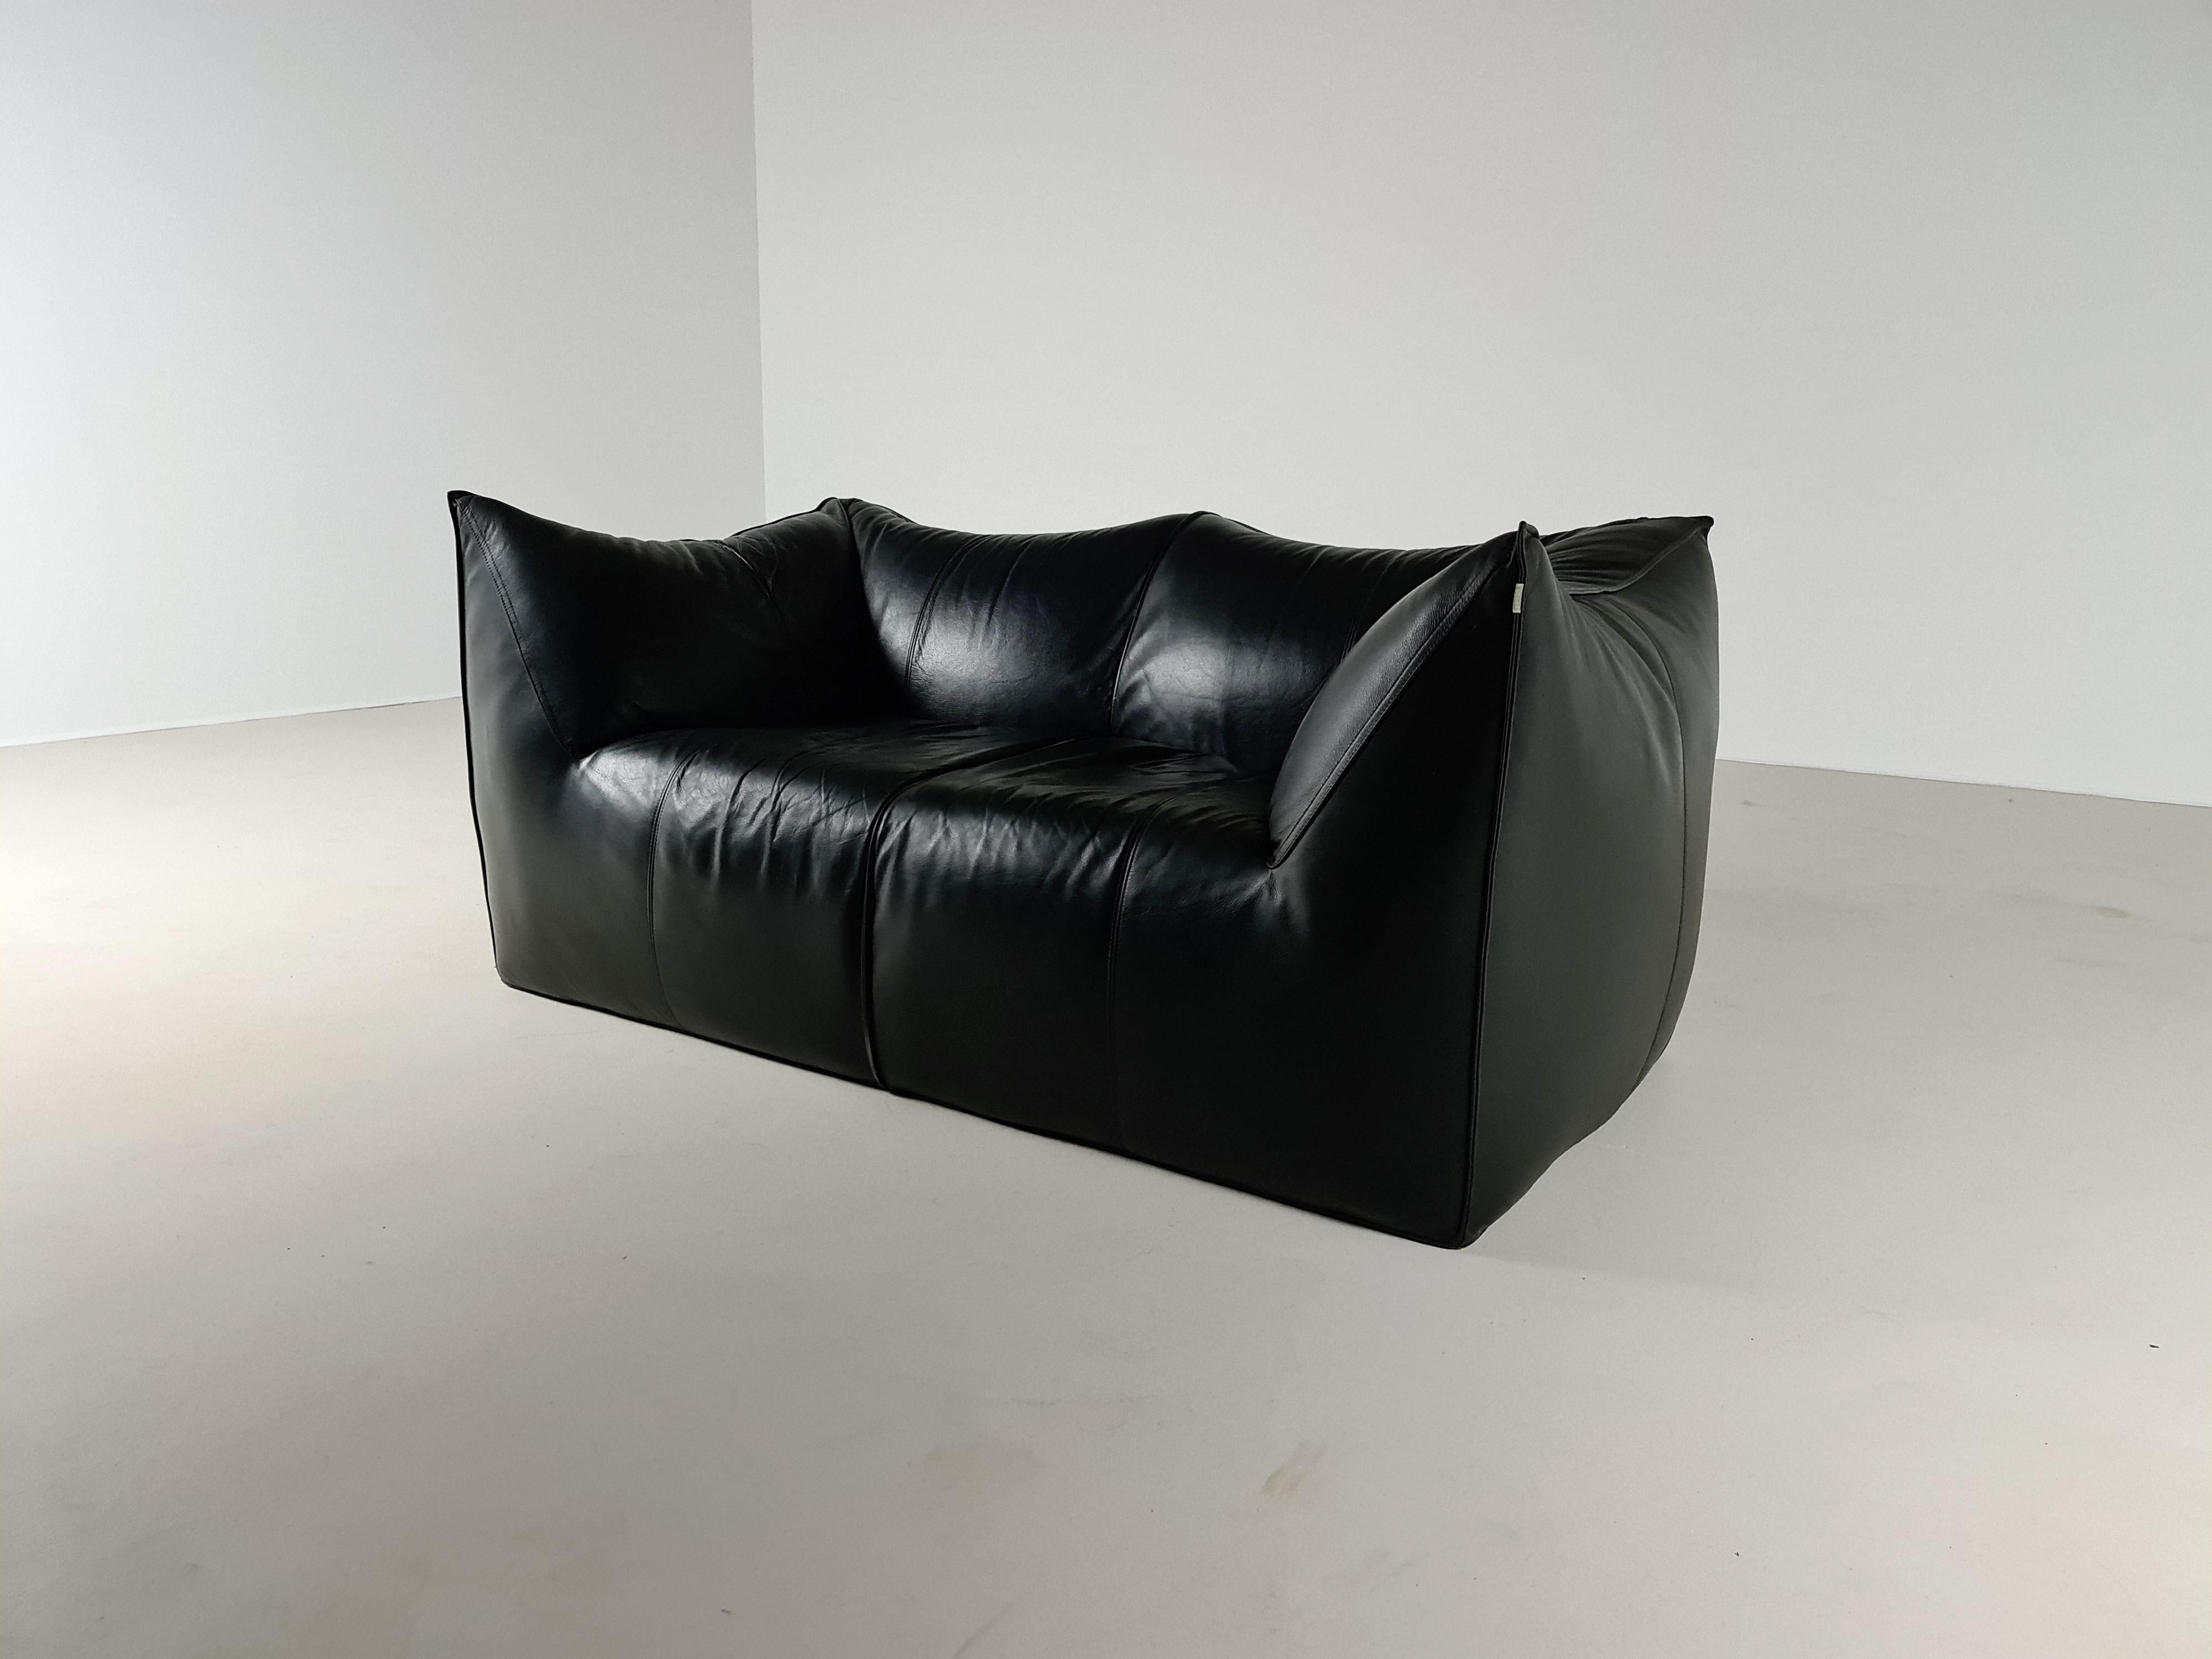 Le Bambole original black leather sofa by Mario Bellini for B&B Italia, 1970s. An iconic piece of Italian design. It was awarded the 1979 'Compasso d'Oro' award. An example of Le Bambole is included in MoMA's permanent collection.